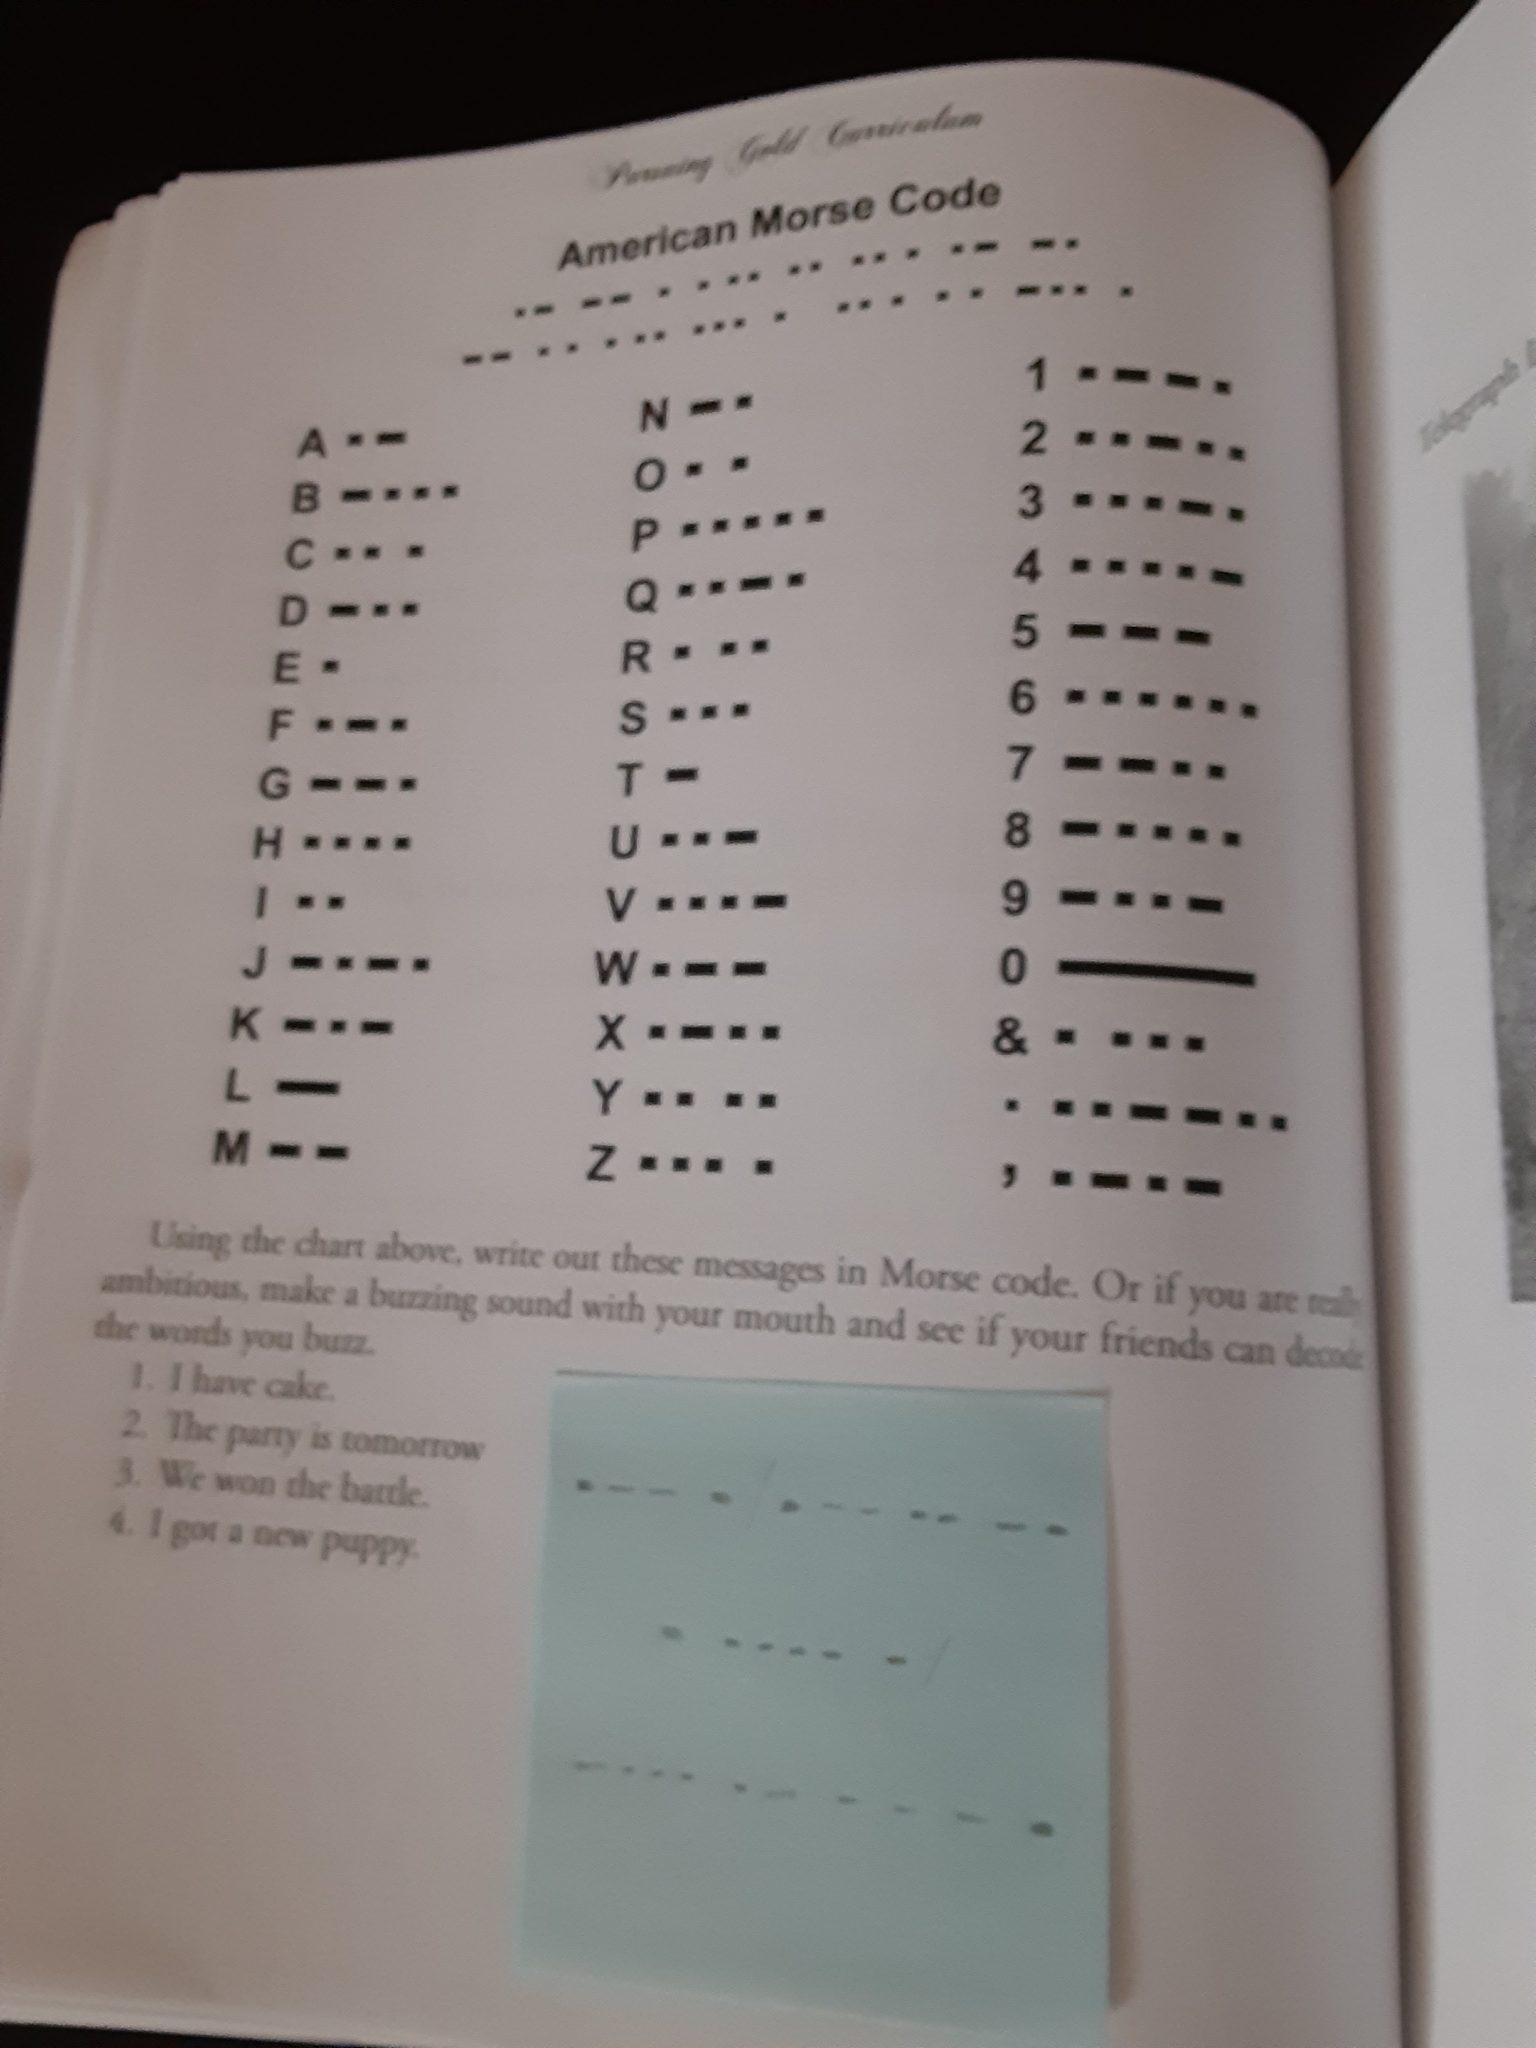 Morse code and student message in Morse code from the history of paper money curriculum